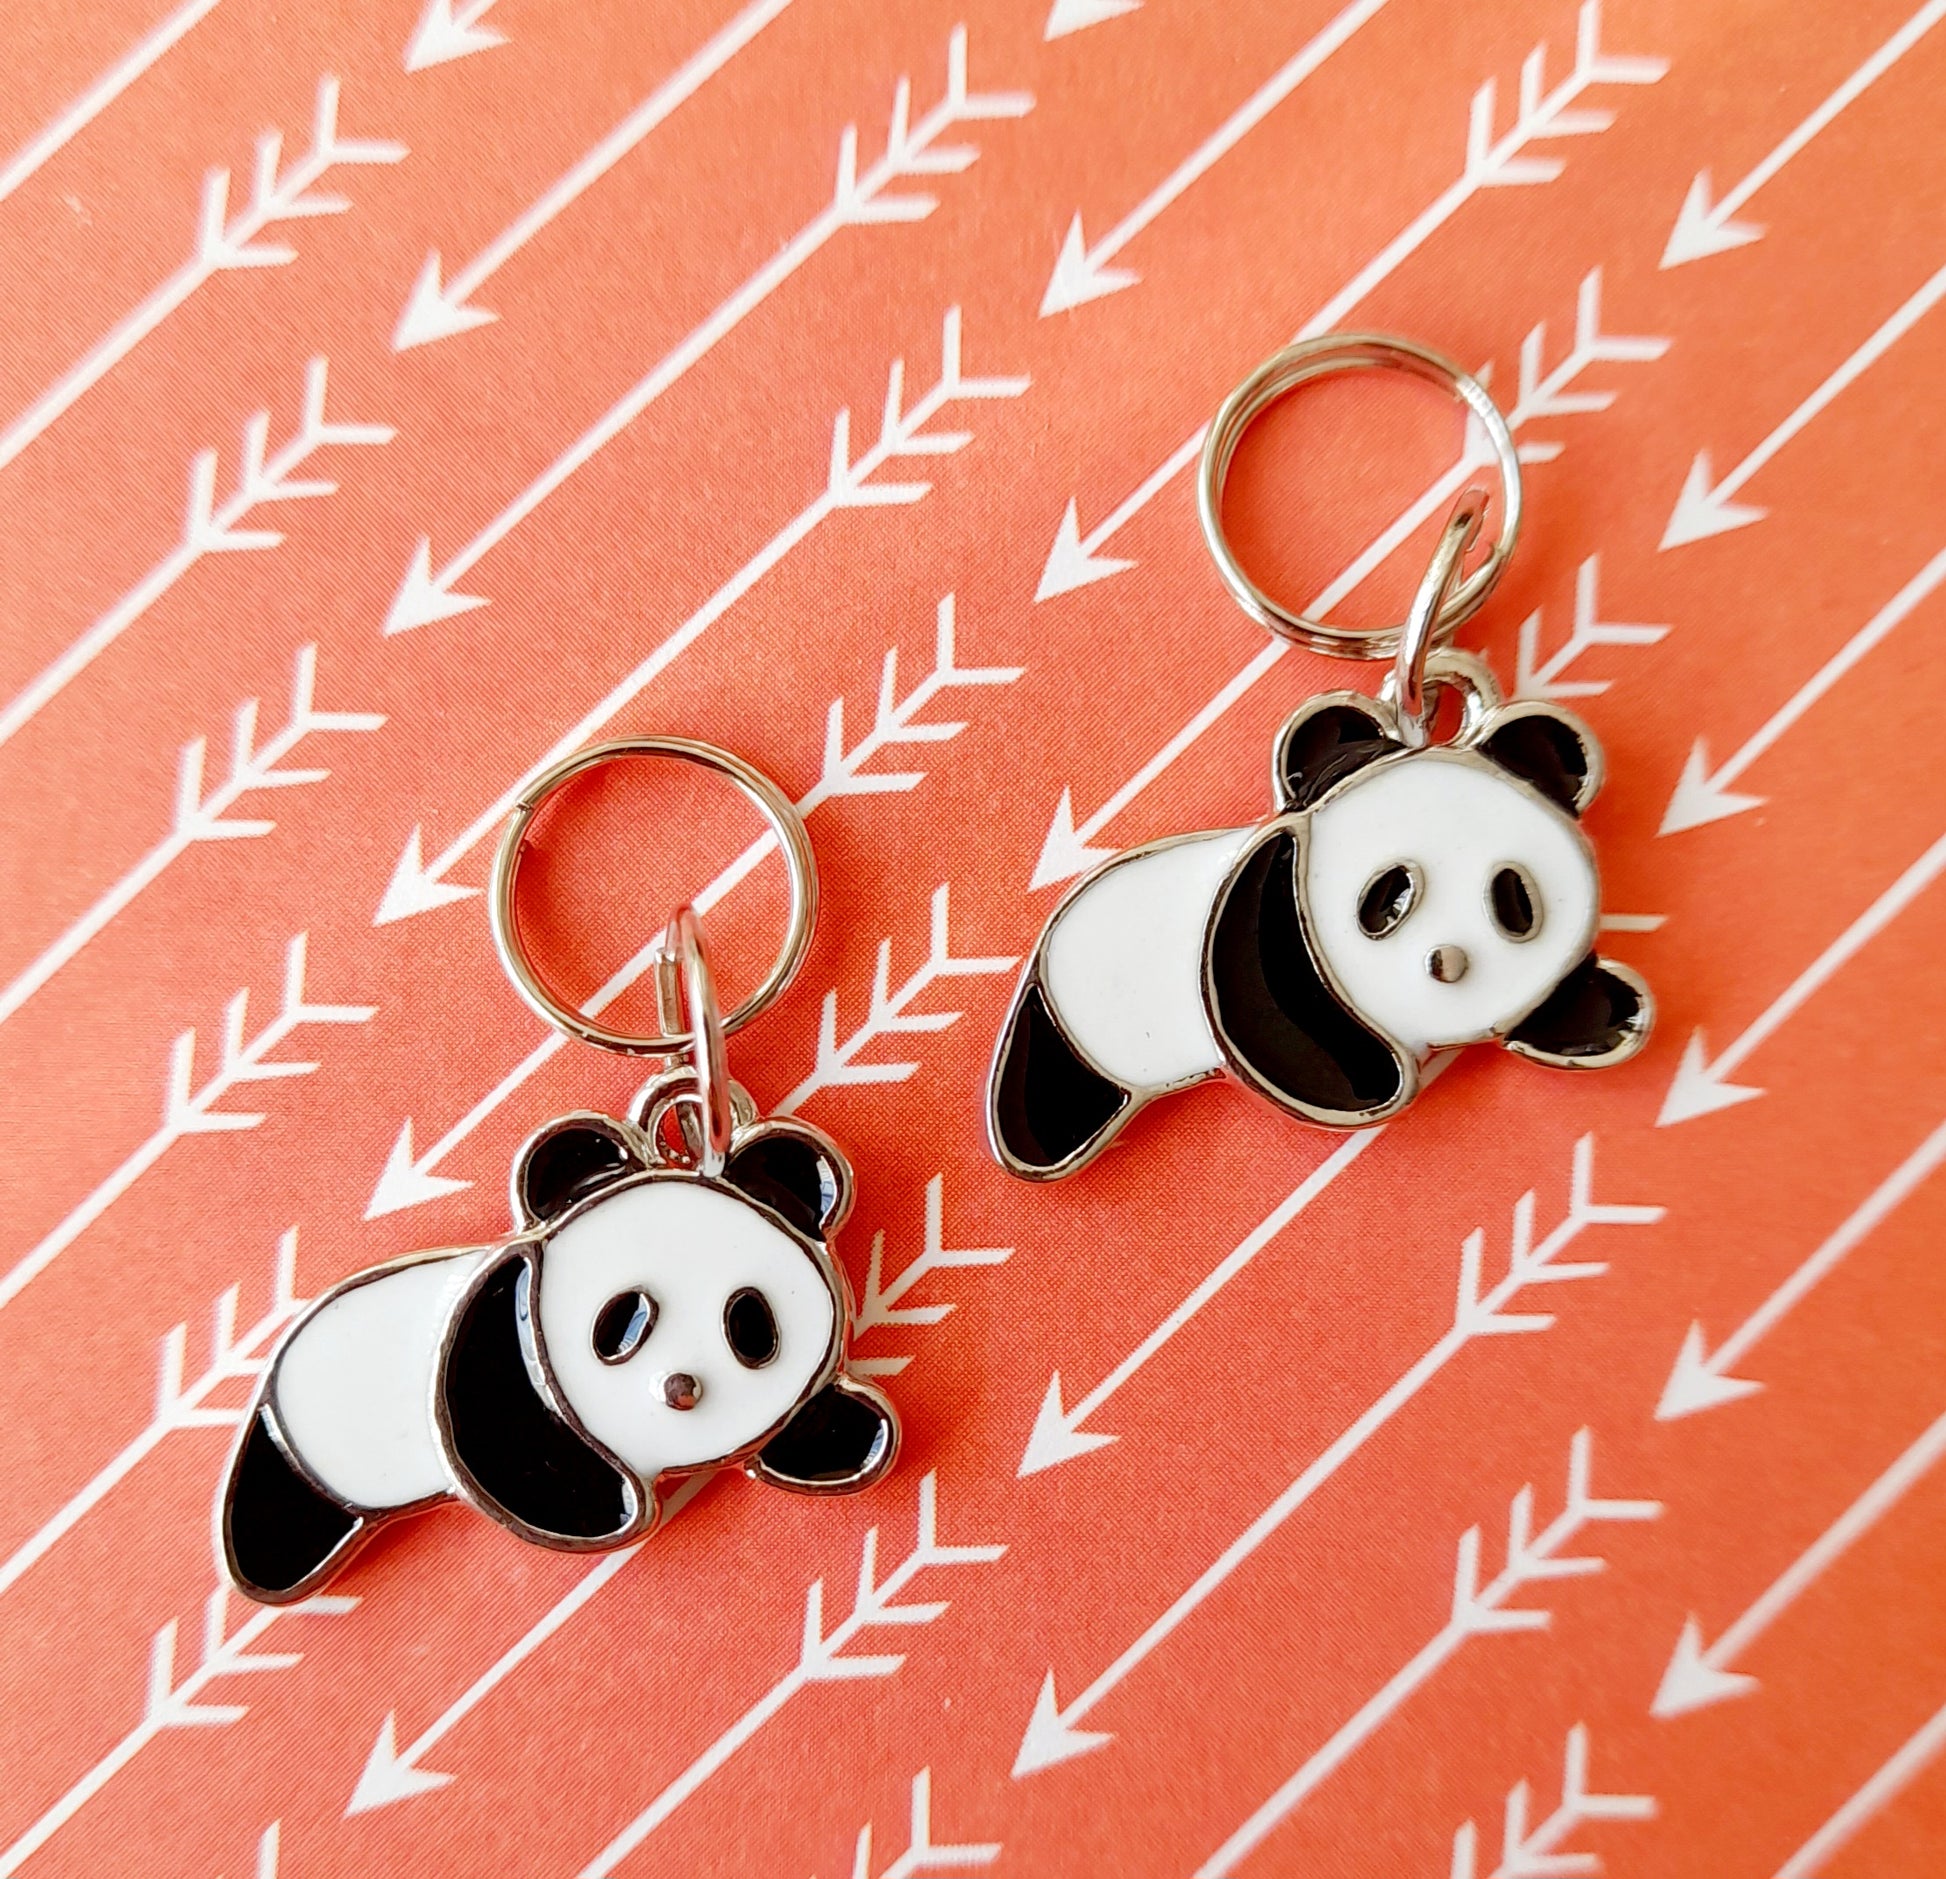 Cute stitch marker set for knitting or crochet